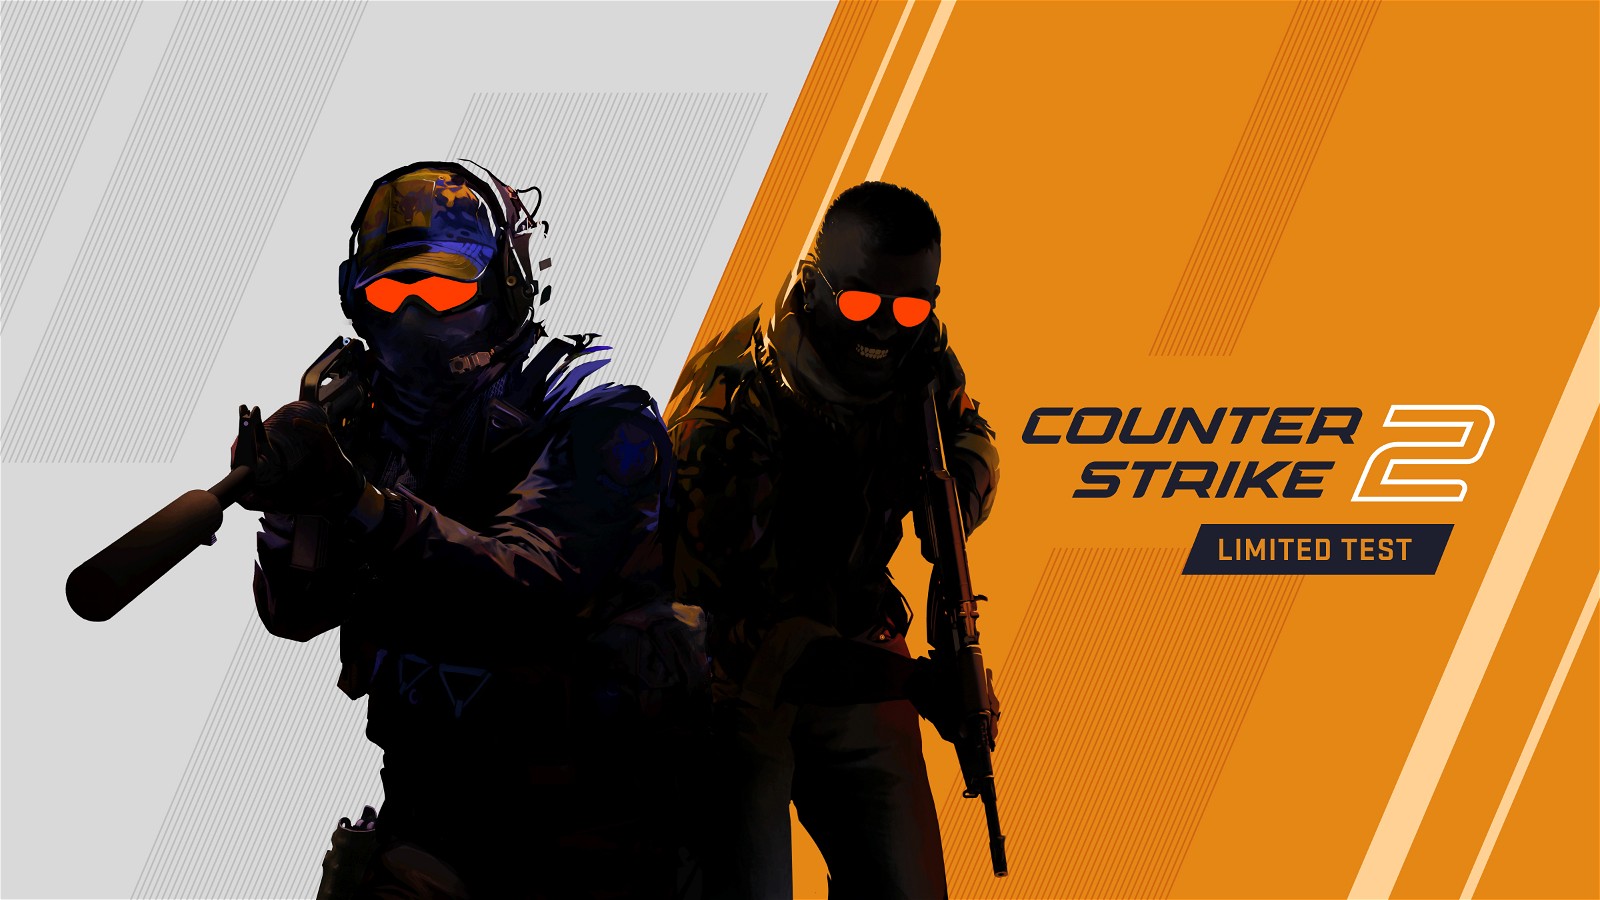 Counter Strike 2 - Call of Duty